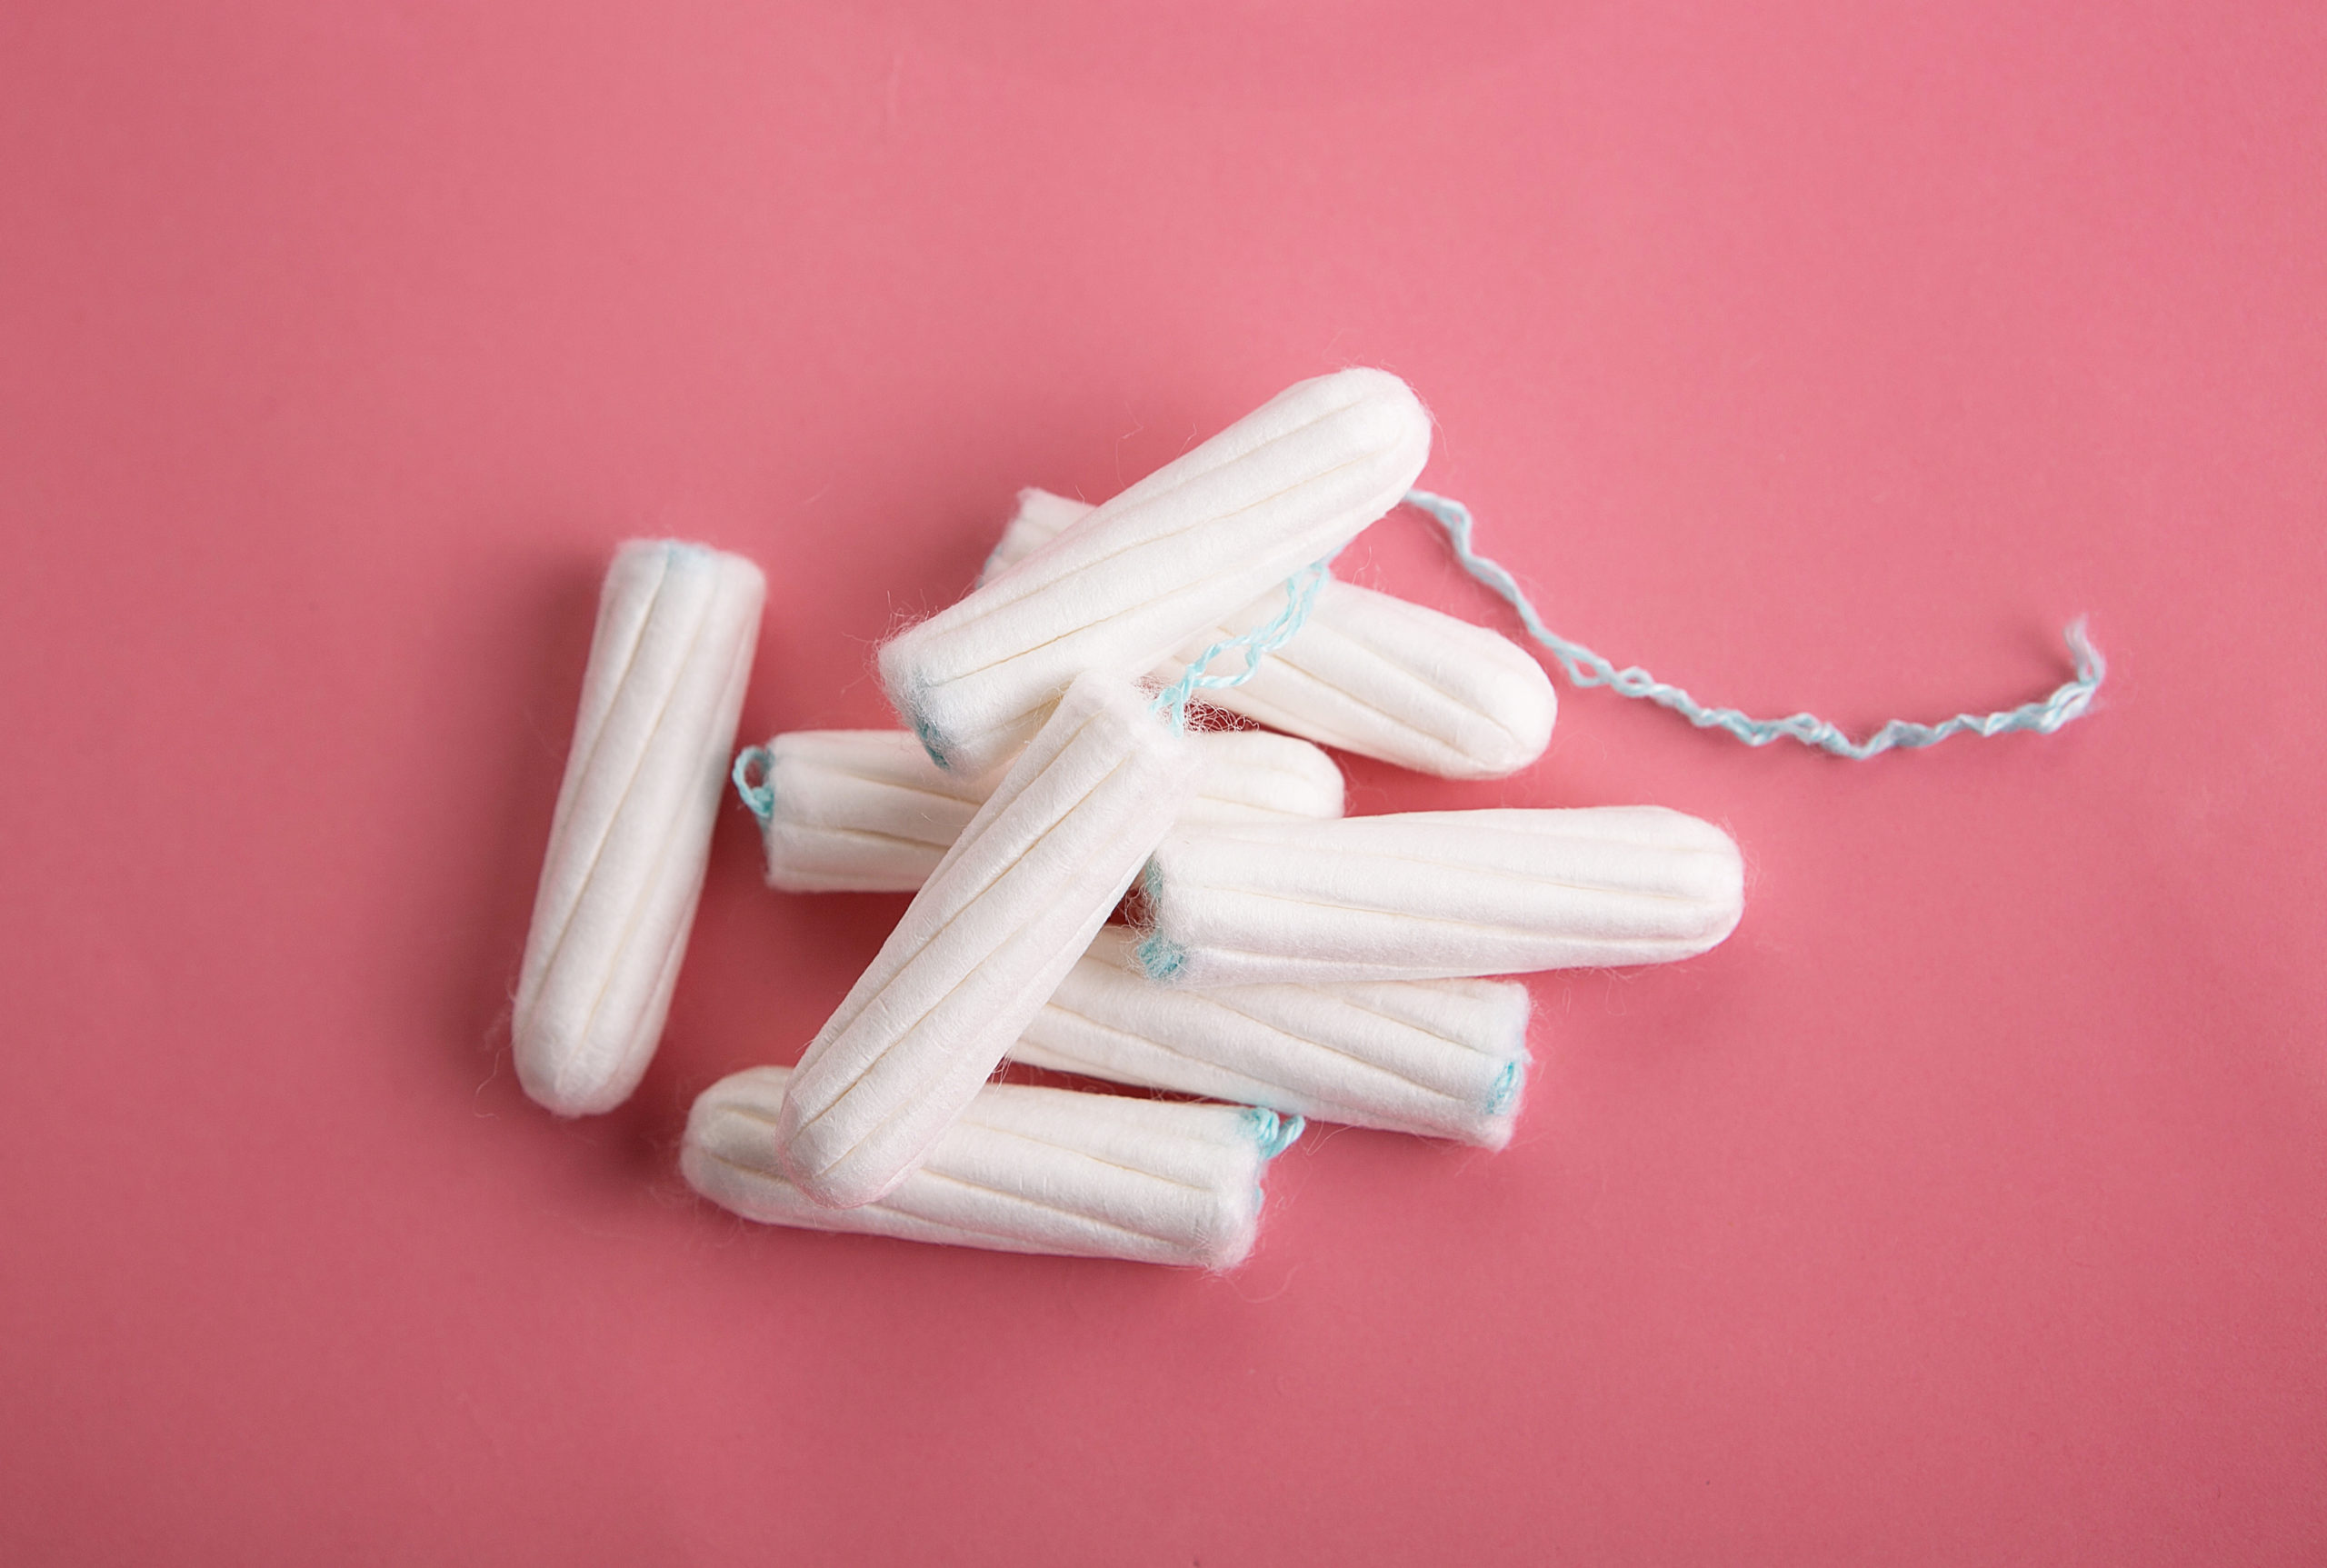 tampons on pink background your period health